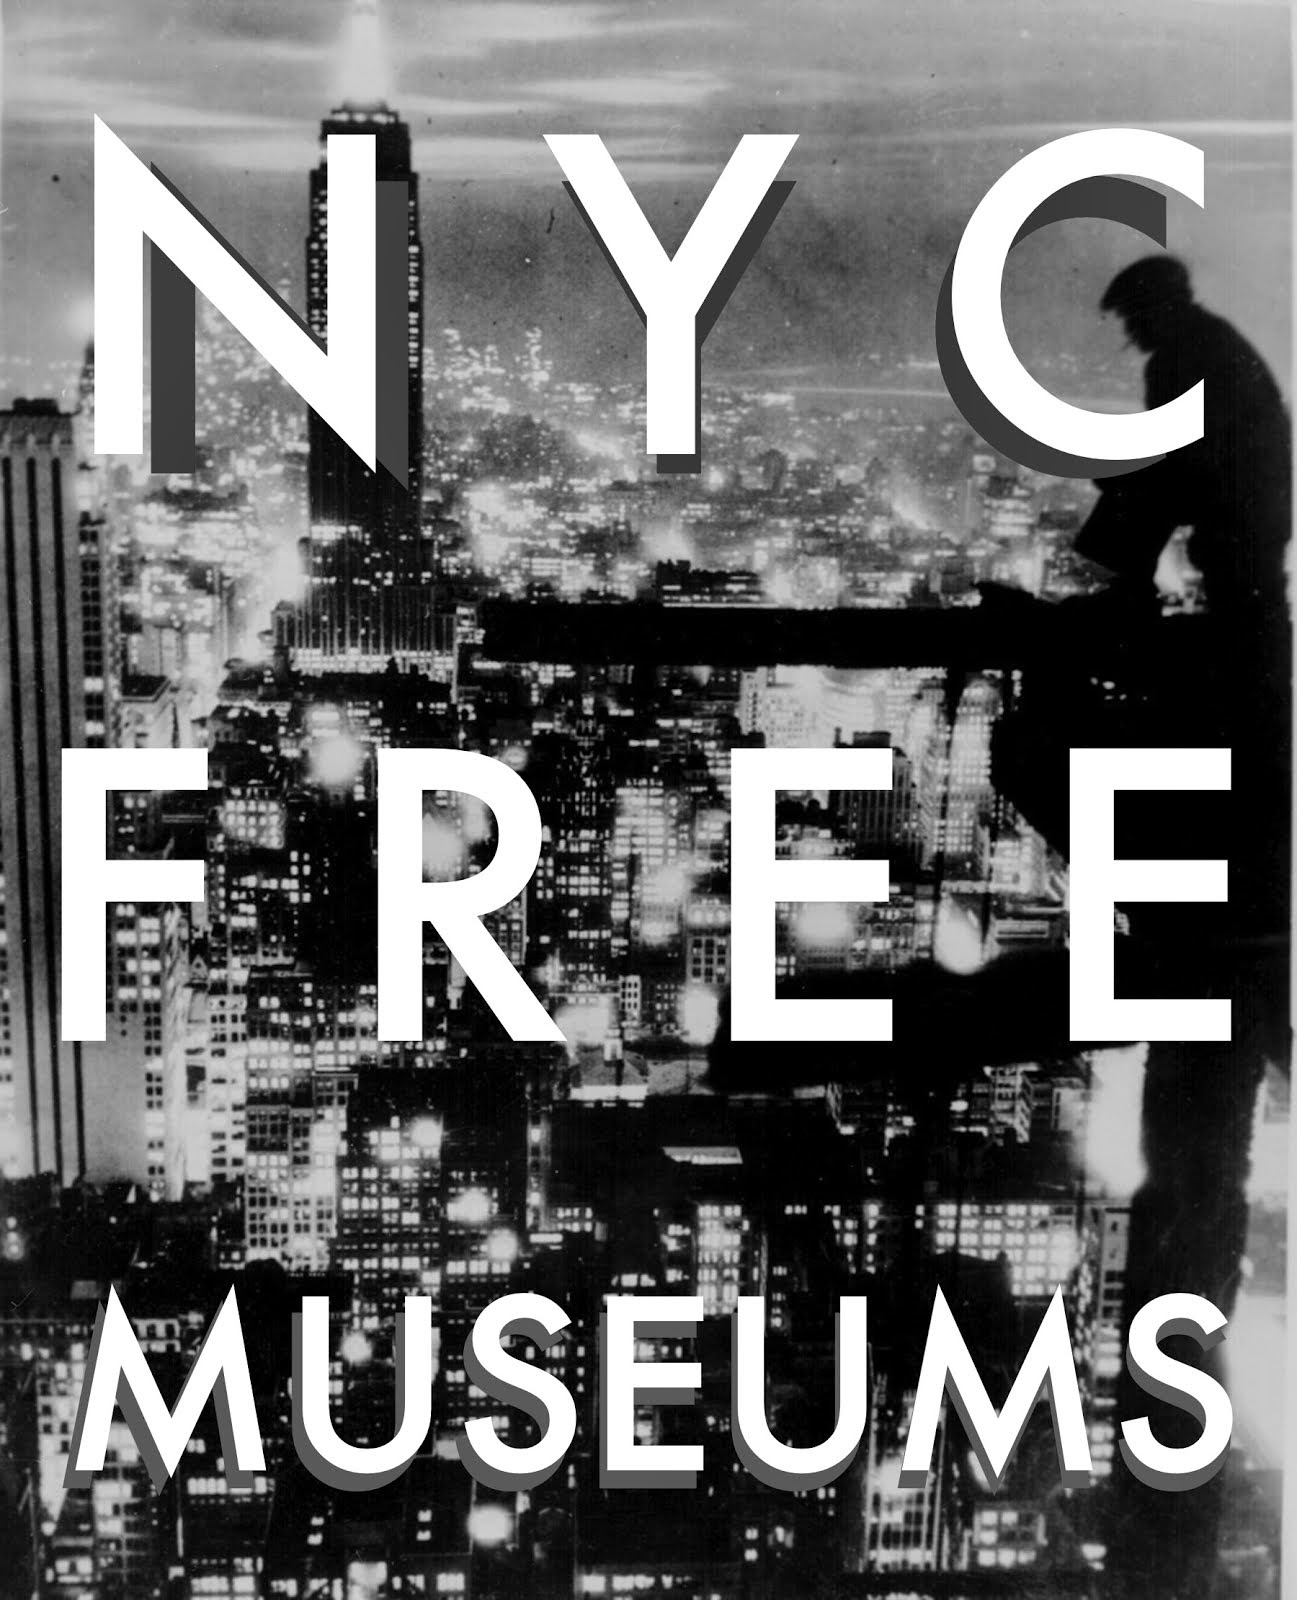 FREE MUSEUMS NYC